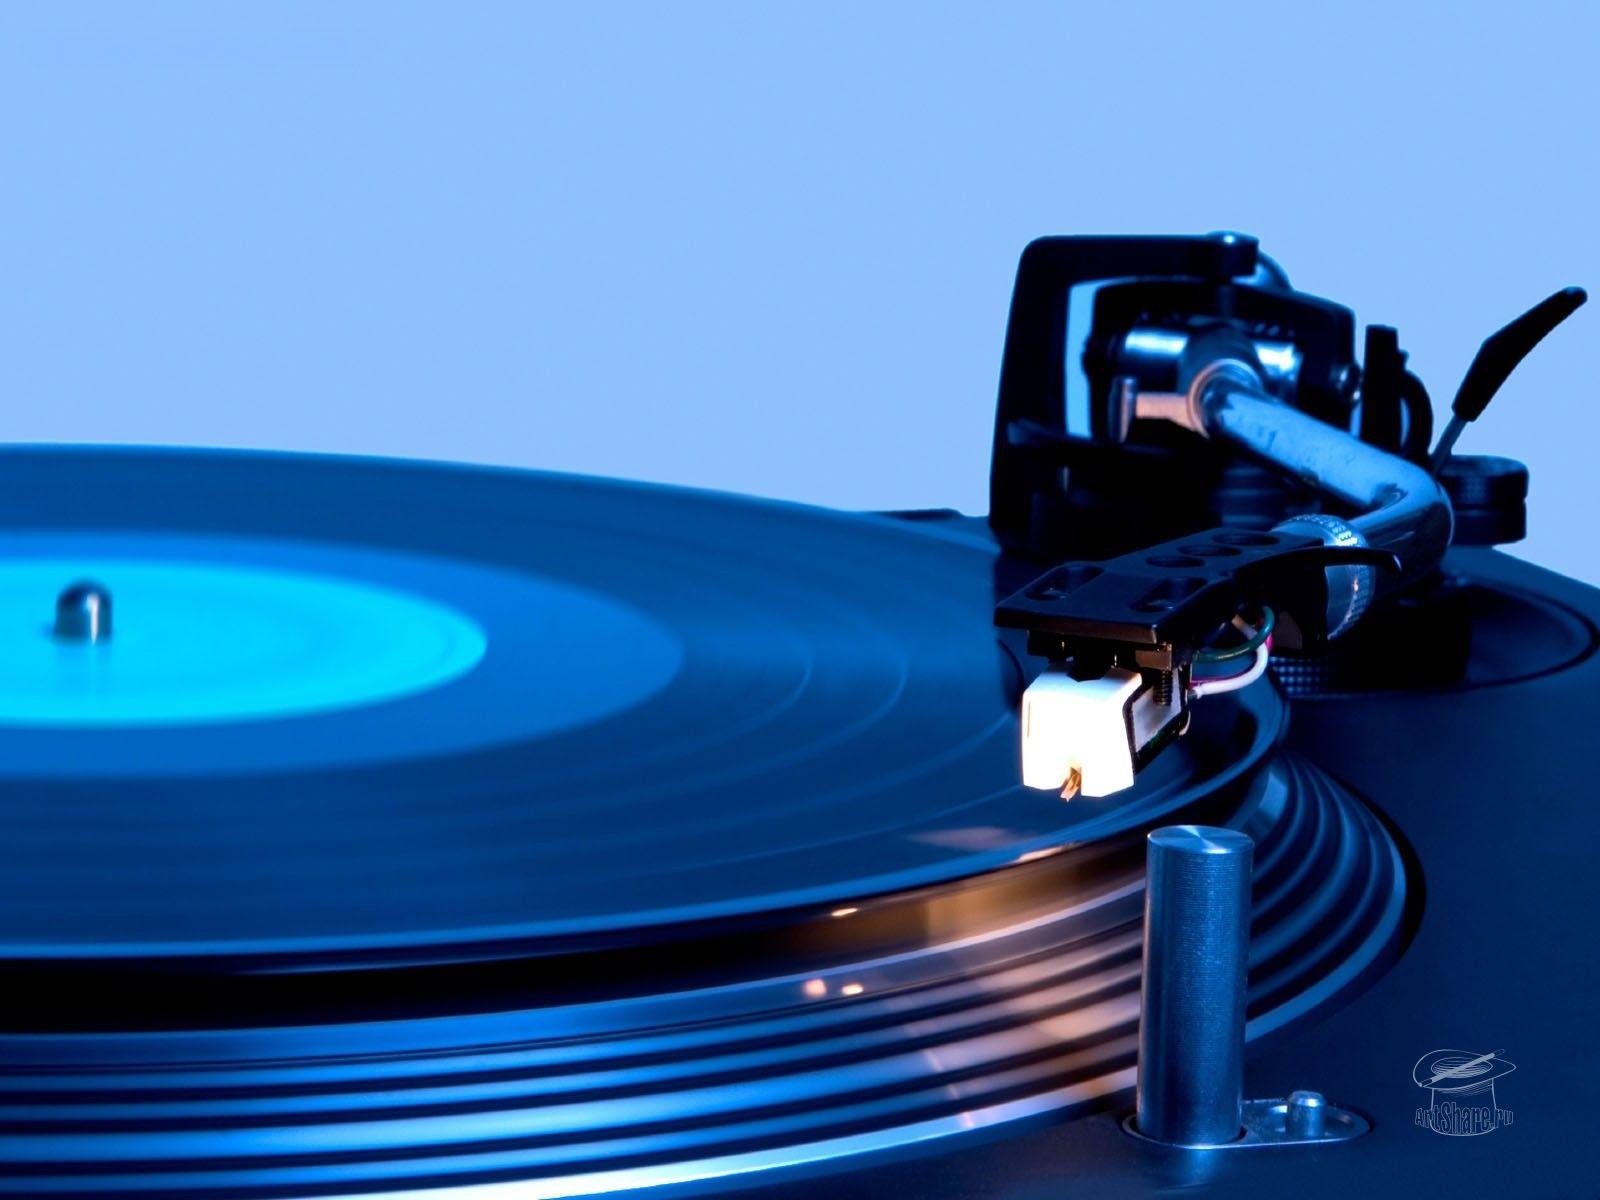 Dj Turntable Wallpapers Top Free Dj Turntable Backgrounds